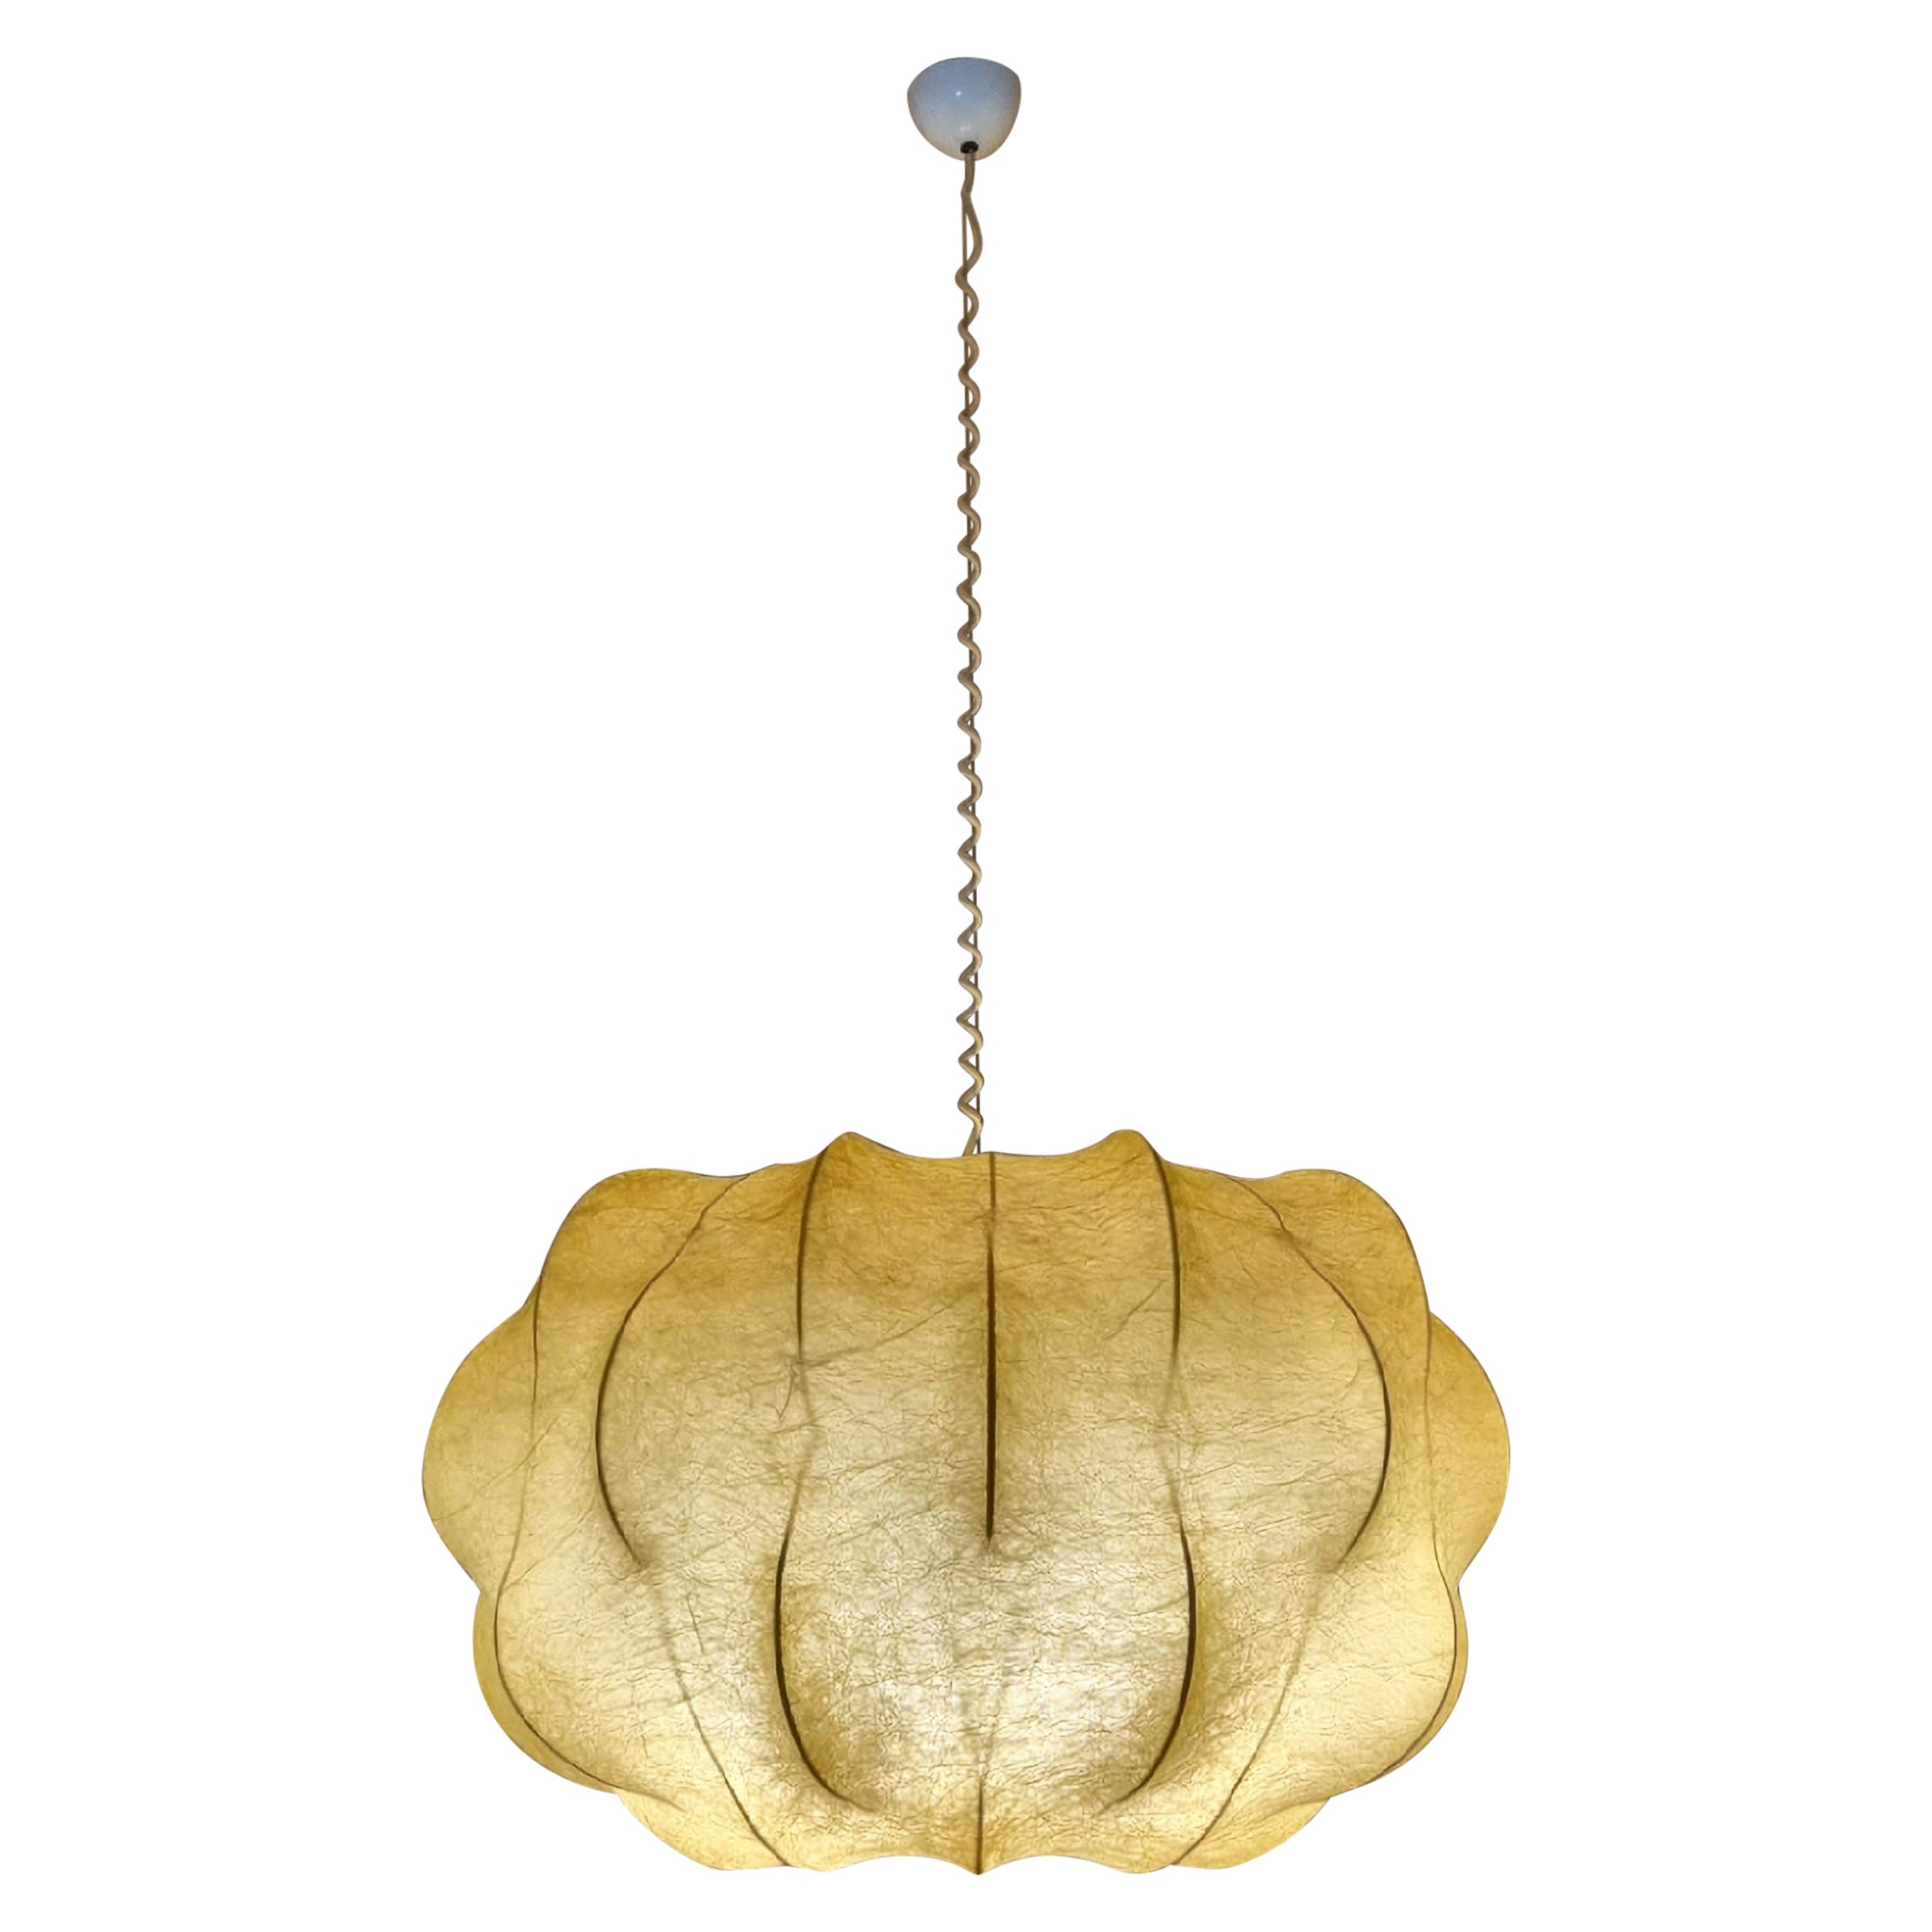 Nuvola ceiling lamp by Tobia Scarpa for Flos 1963